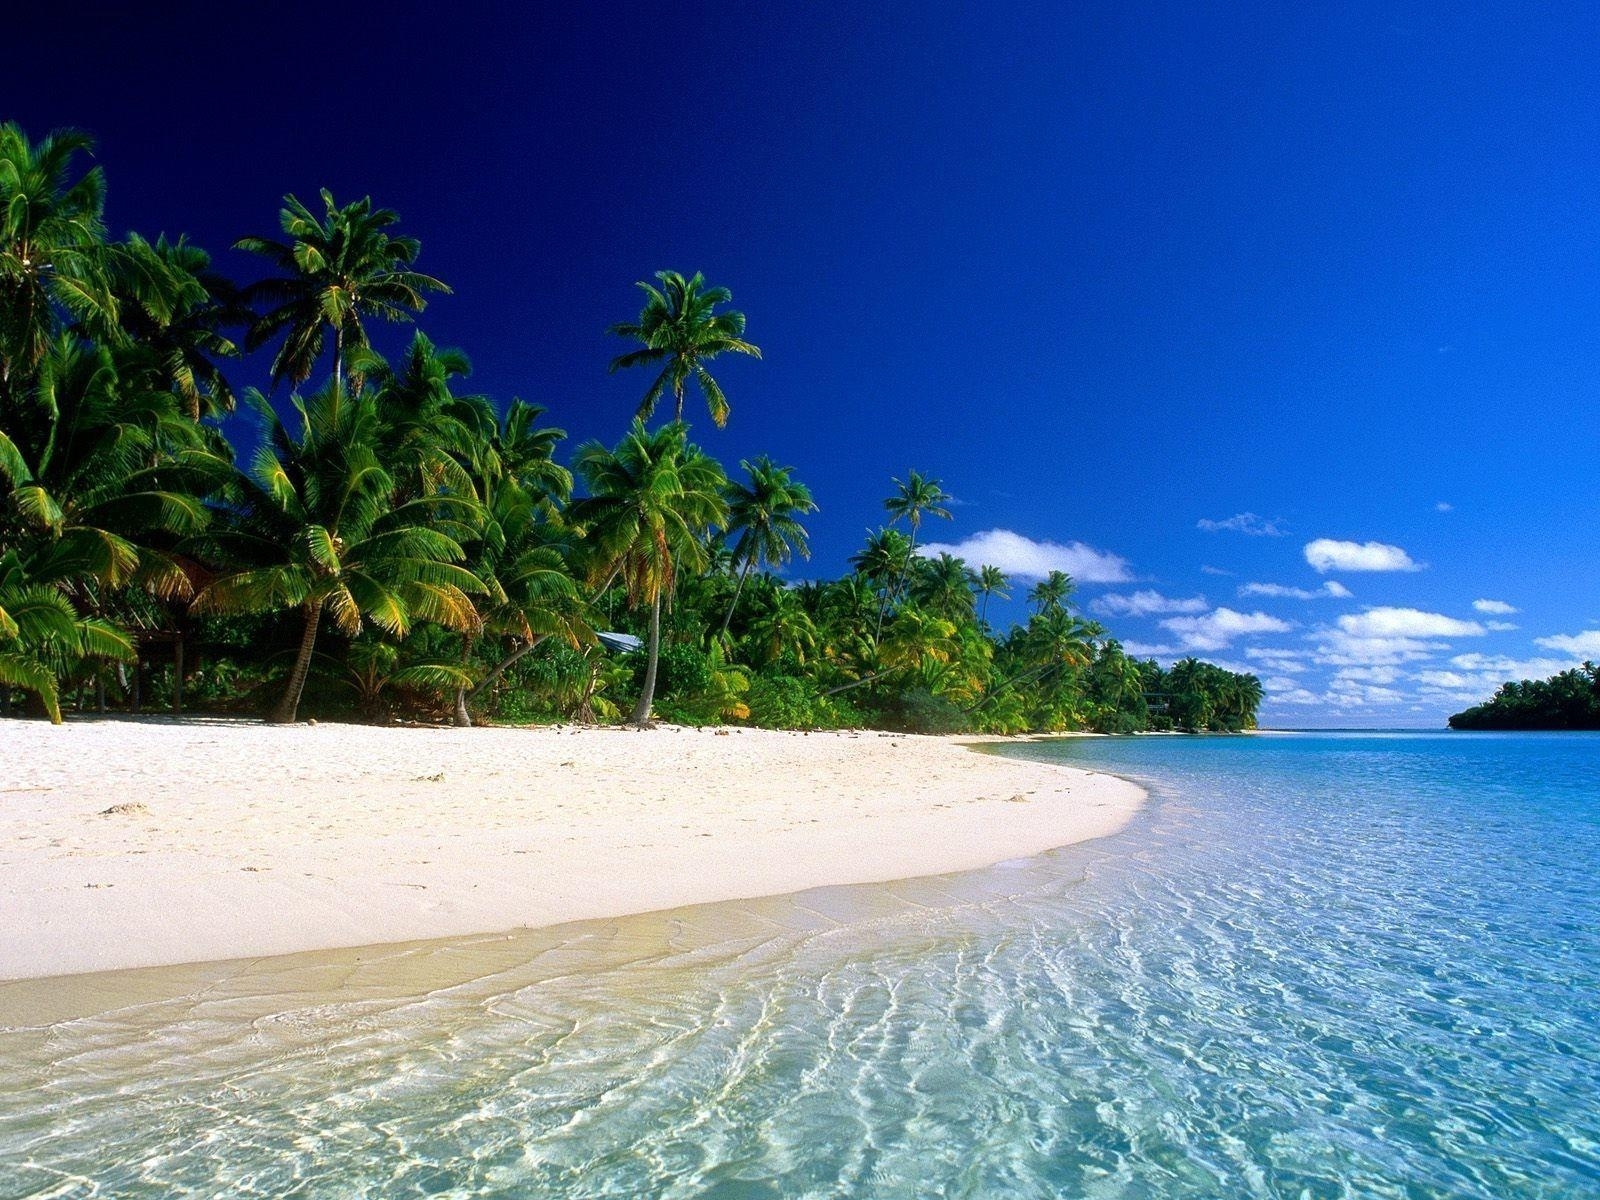 10 Top Most Beautiful Beaches In The World Wallpaper FULL HD 1080p For PC Desktop